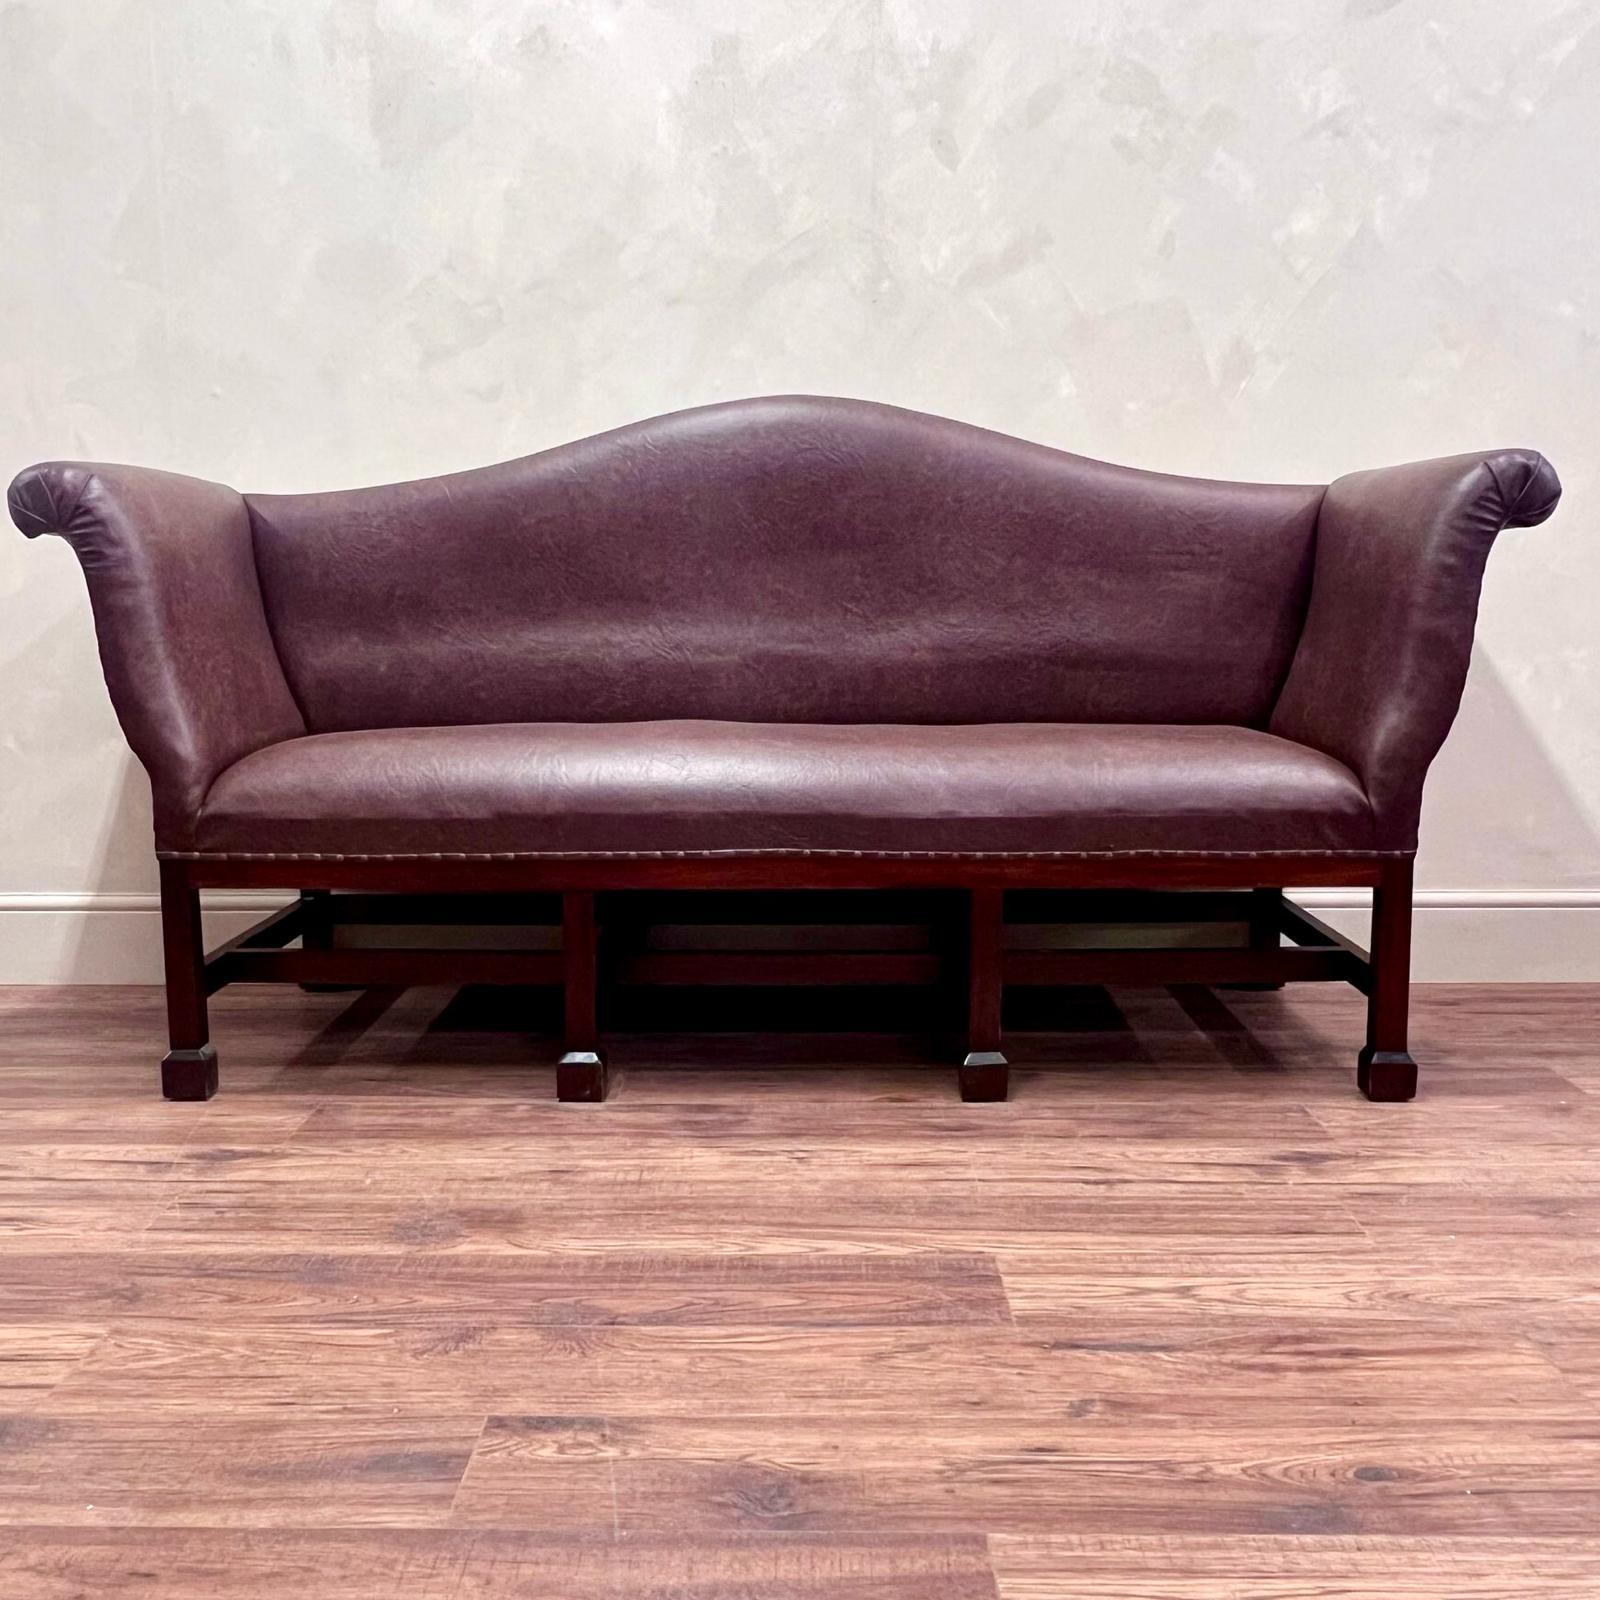 These 8 legged sofas were bespokely made for a country estate in Oxfordshire.
Made in the 70's, upholstered in rexine, these sofas have hardly been sat on, as they were not part of the main living area.
Sitting on a mahogony frame, these can of